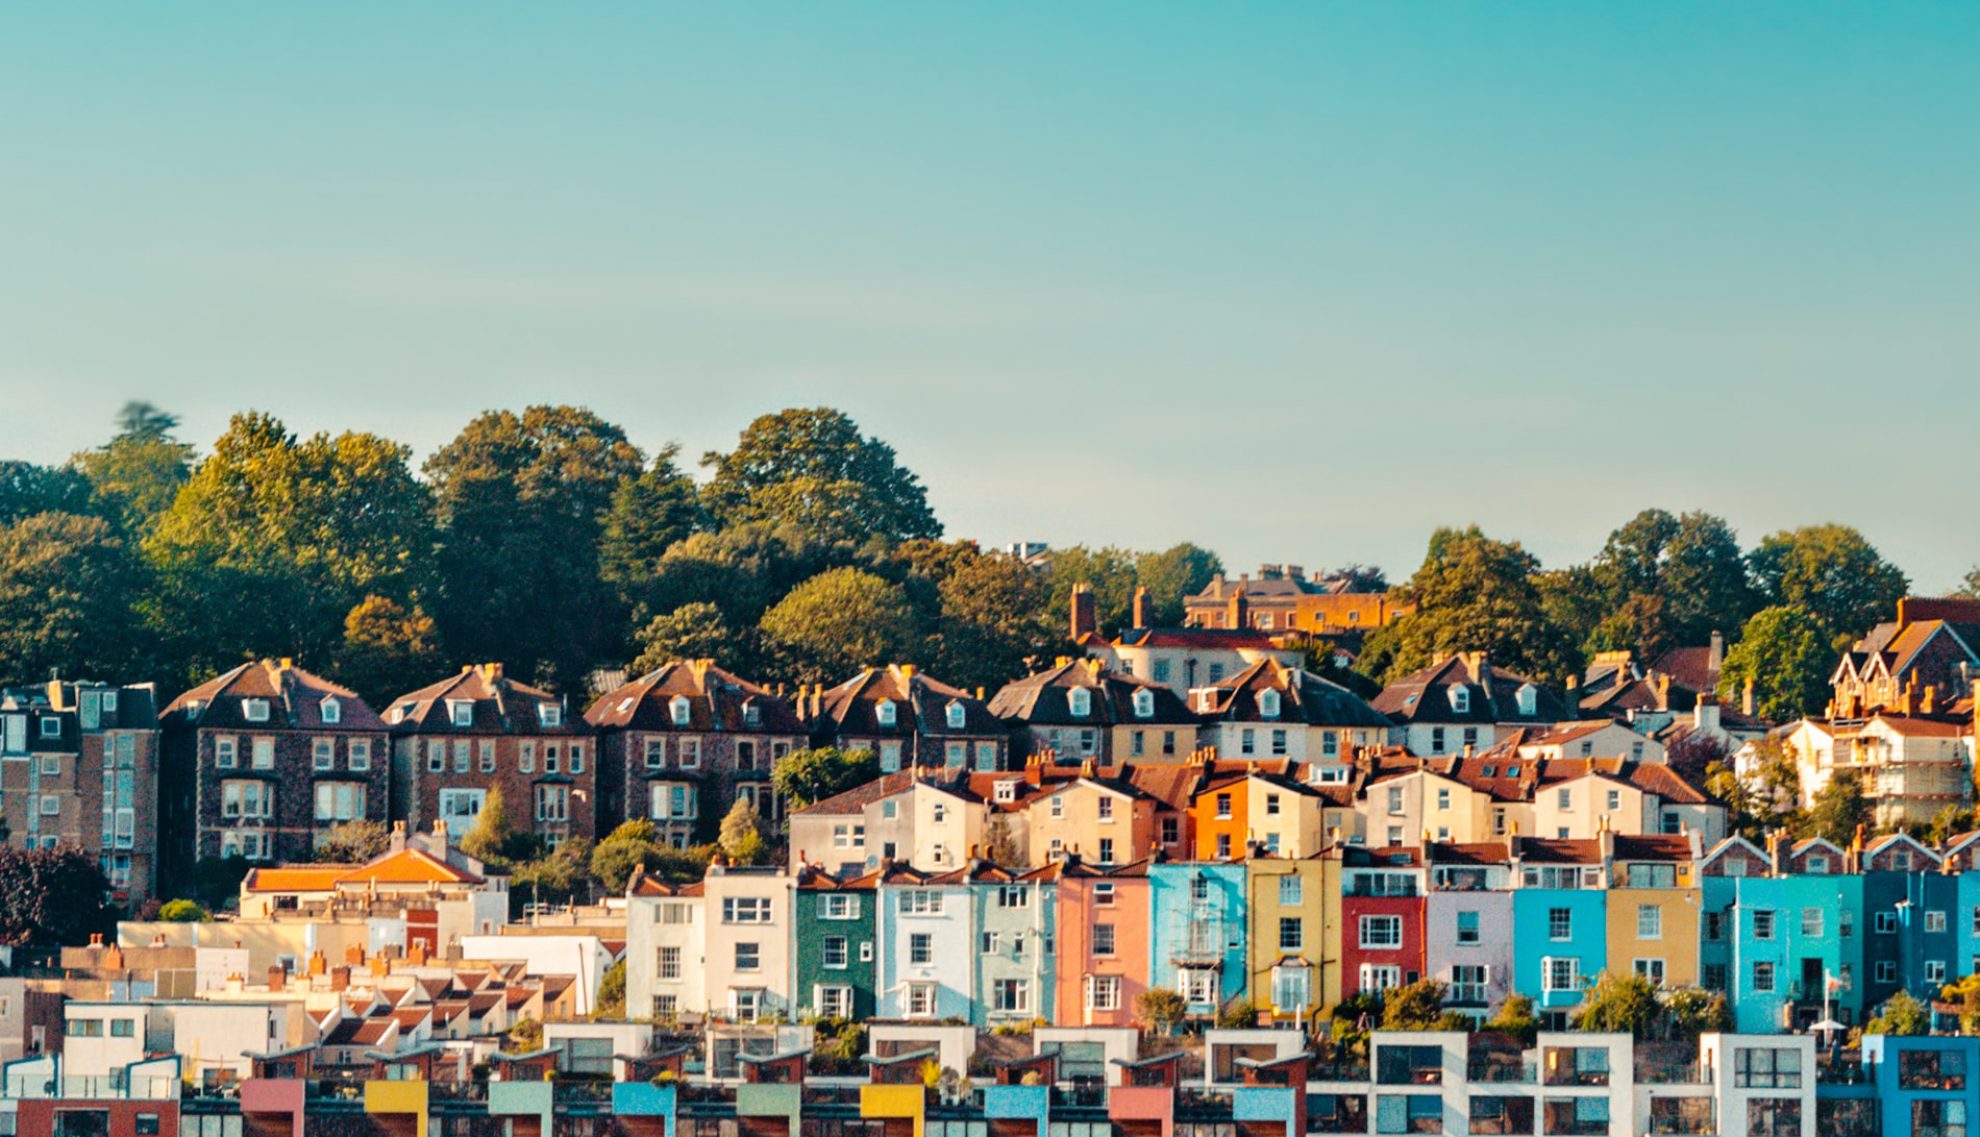 Colourful terraced houses in Bristol